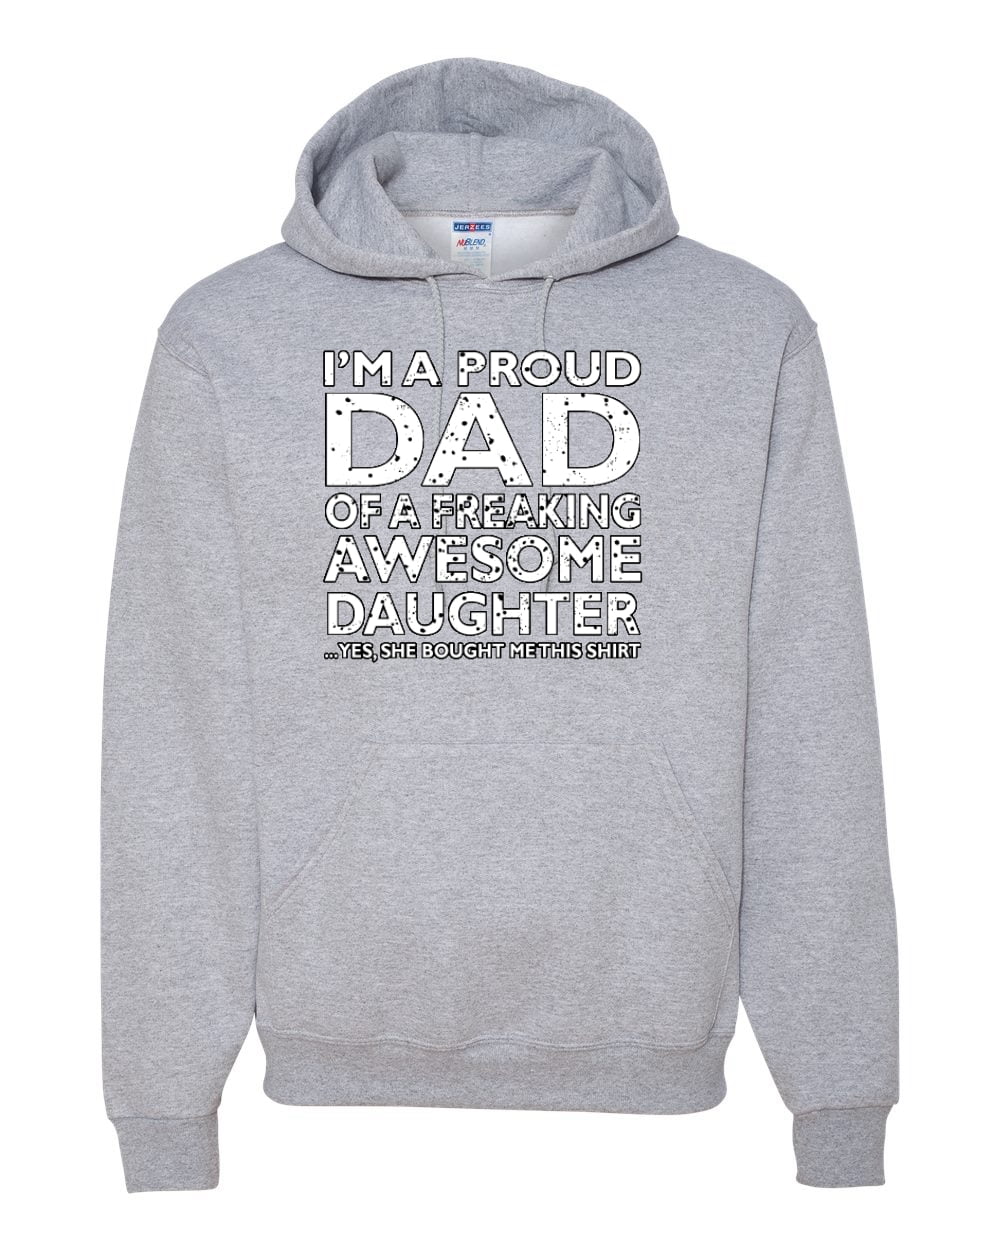 Gift For Daddy Hoodie Awesome Daddy Hooded Sweater Father's Day Gift Sweatshirt 